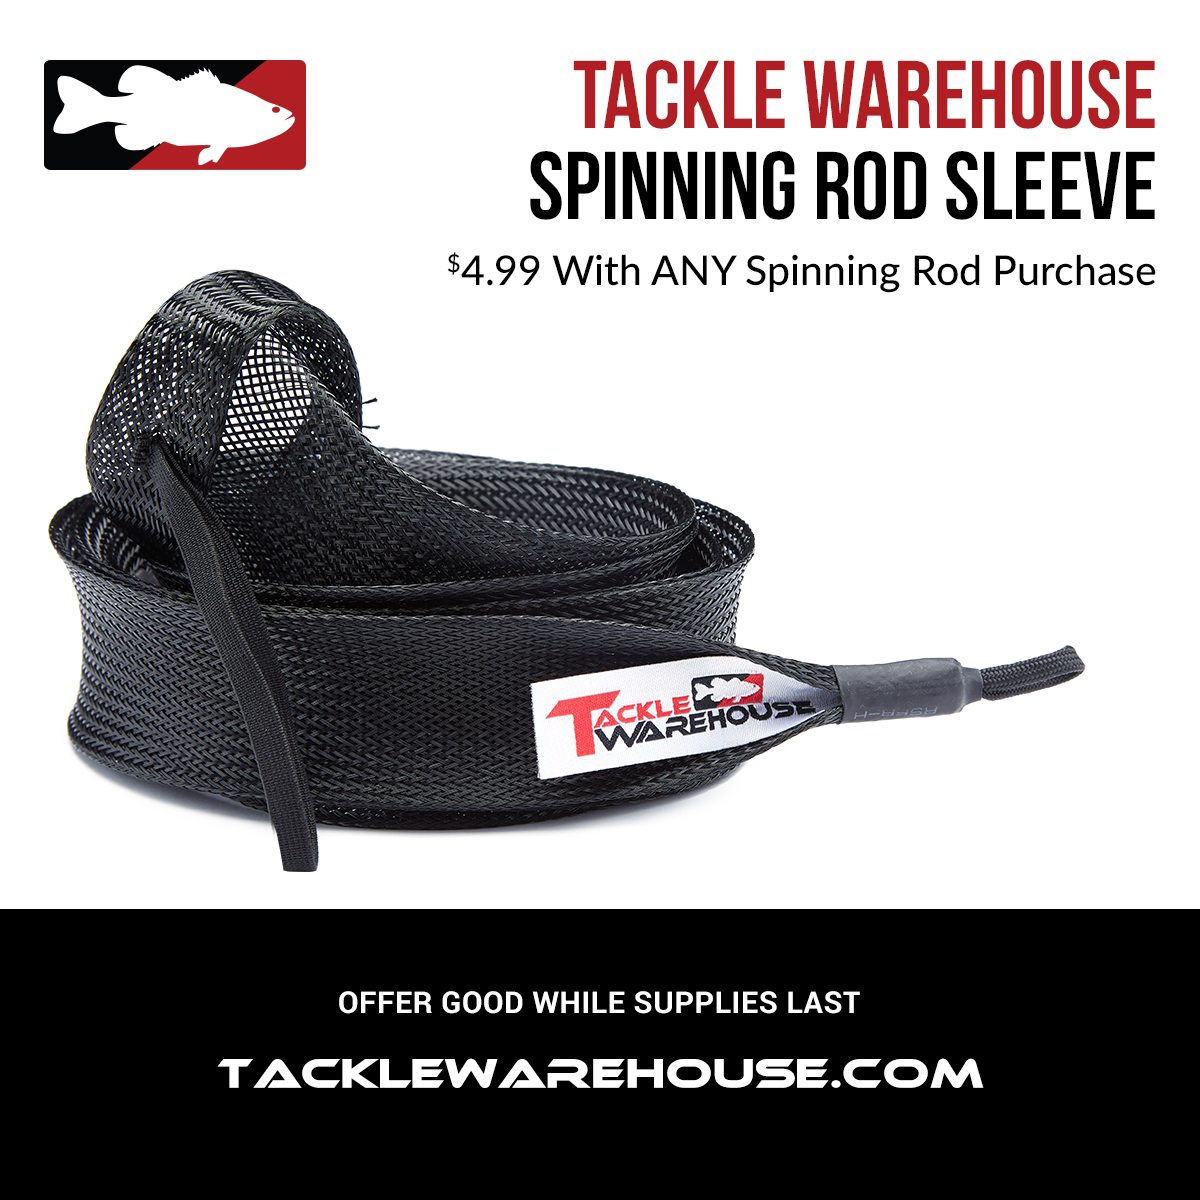 Tackle Warehouse Spinning Rod Sleeve $4.99 With Any Spinning Rod Purchase